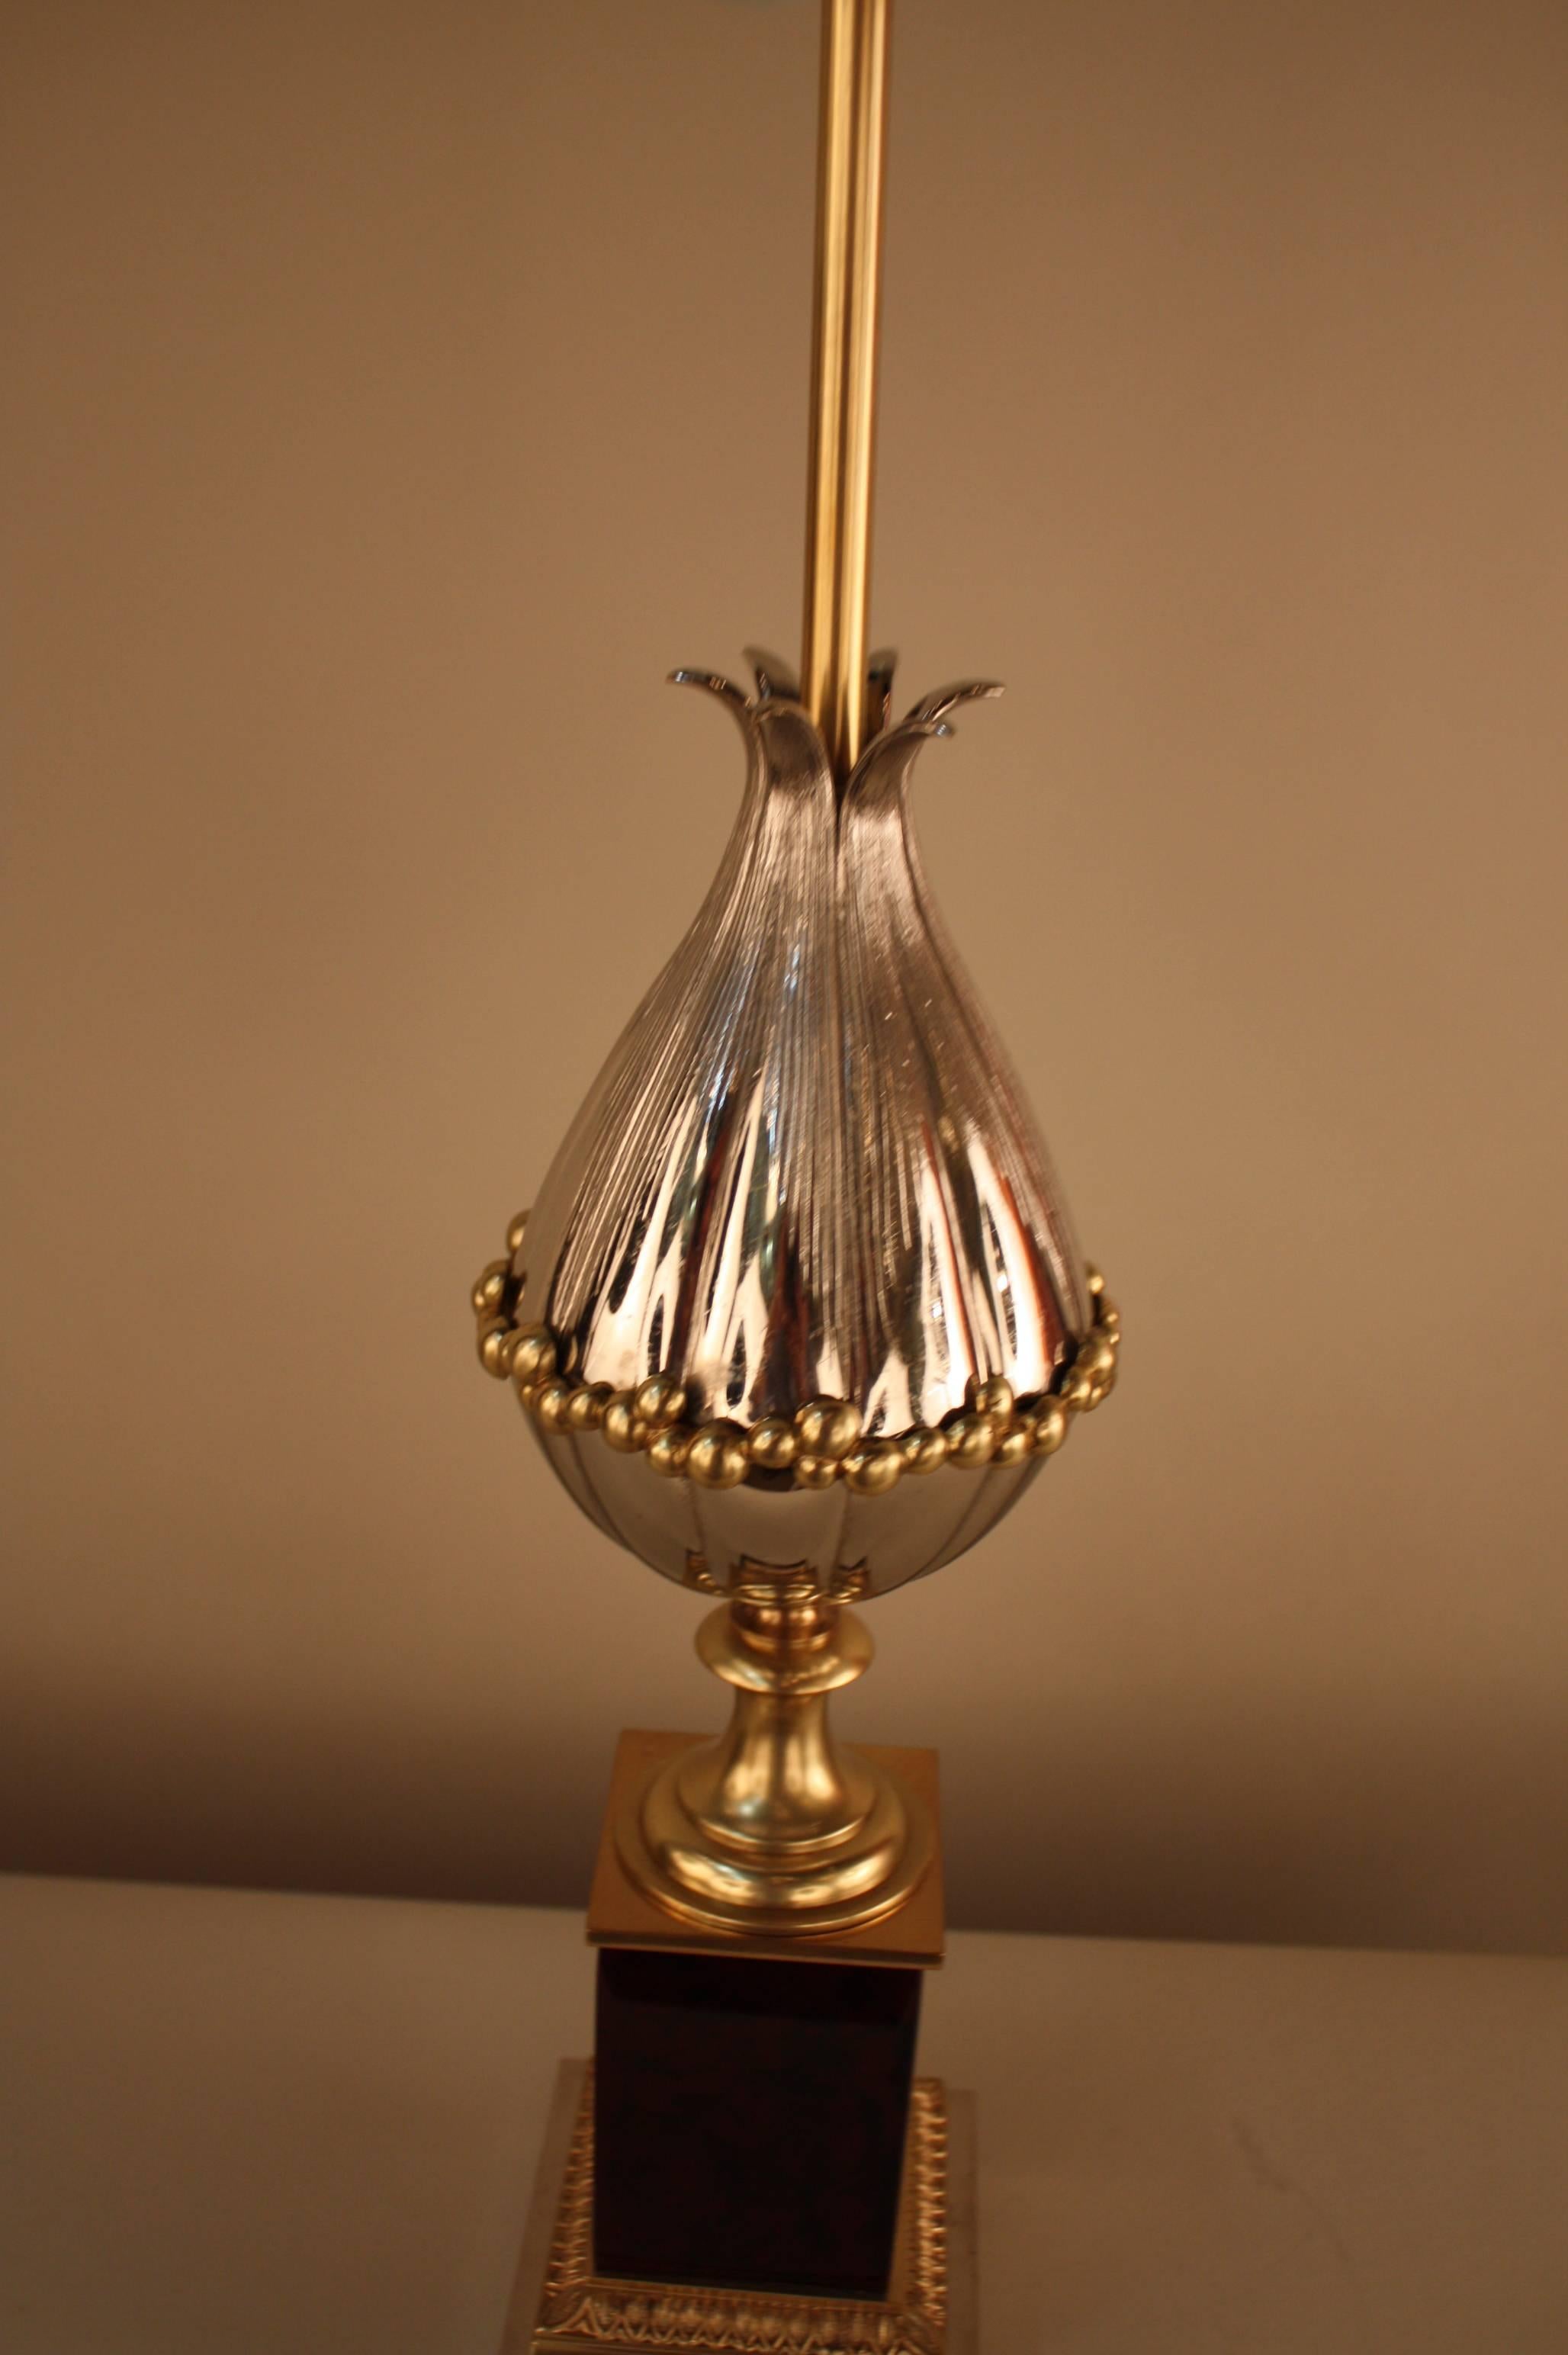 Stunning Nickel and Bronze Table Lamp by Maison Charles In Good Condition For Sale In Fairfax, VA